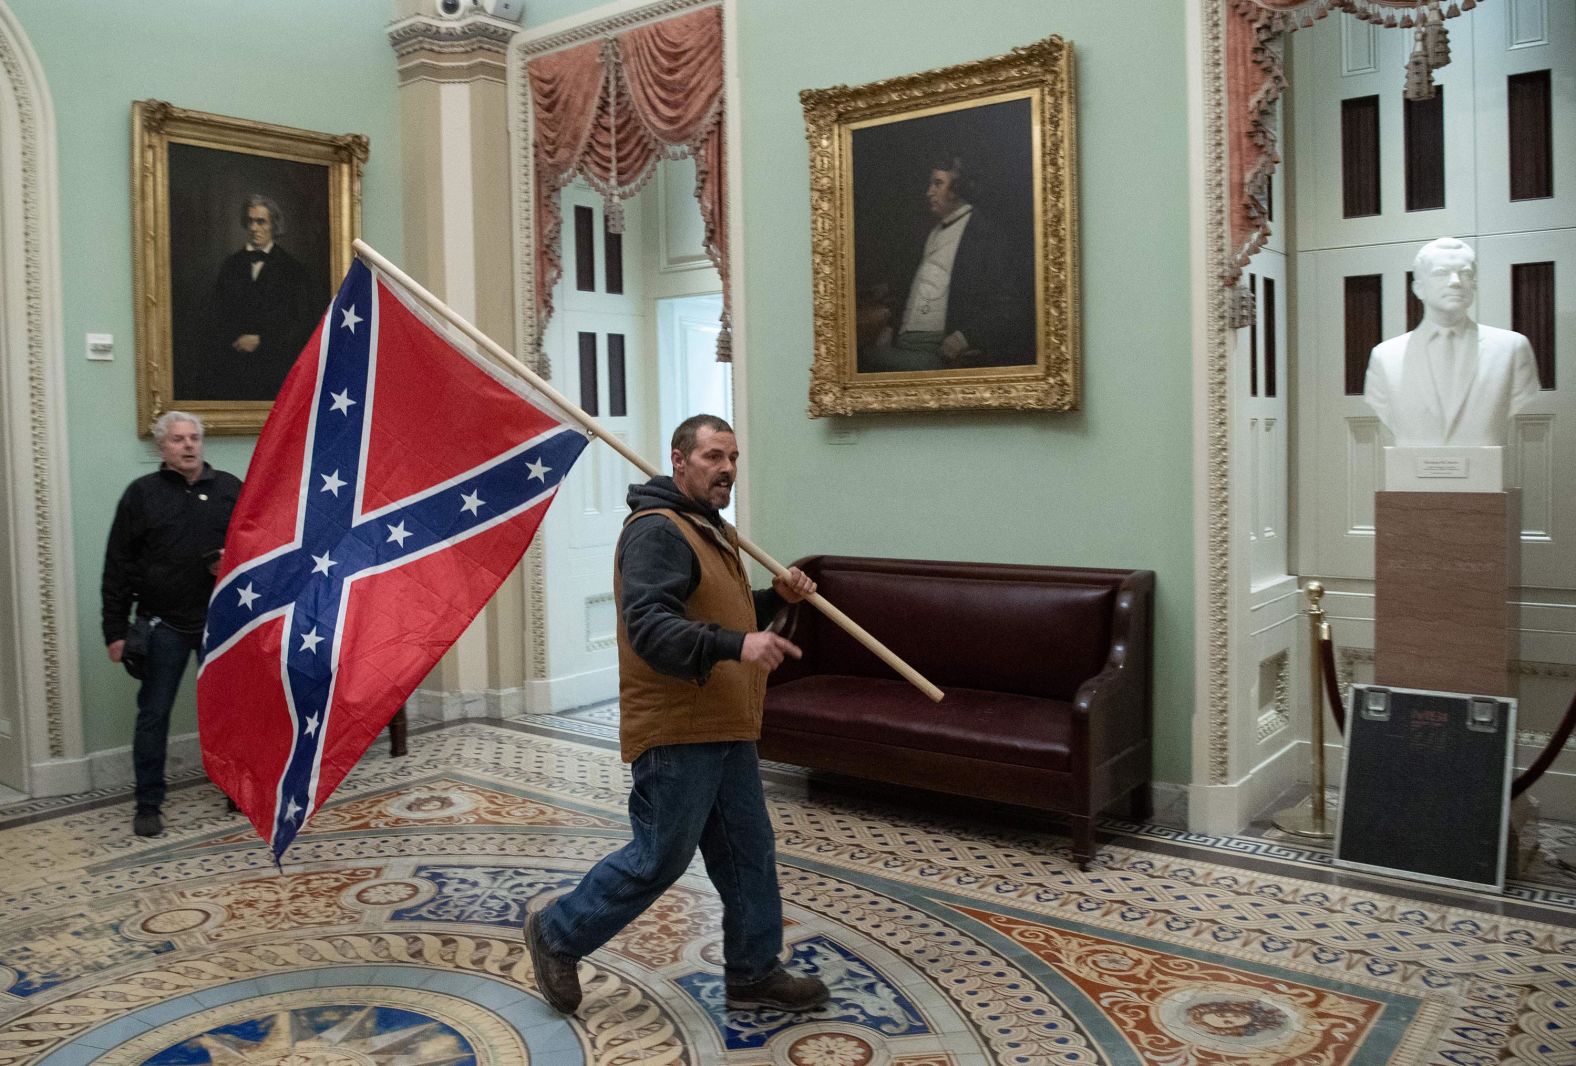 A Trump supporter <a href="https://www.cnn.com/2021/01/07/us/capitol-confederate-flag-fort-stevens/index.html" target="_blank">carries a Confederate battle flag</a> in the Capitol Rotunda after rioters breached the building. During the Civil War, the closest any insurgent carrying a Confederate flag ever came to the Capitol was about 6 miles, during the Battle of Fort Stevens in 1864.